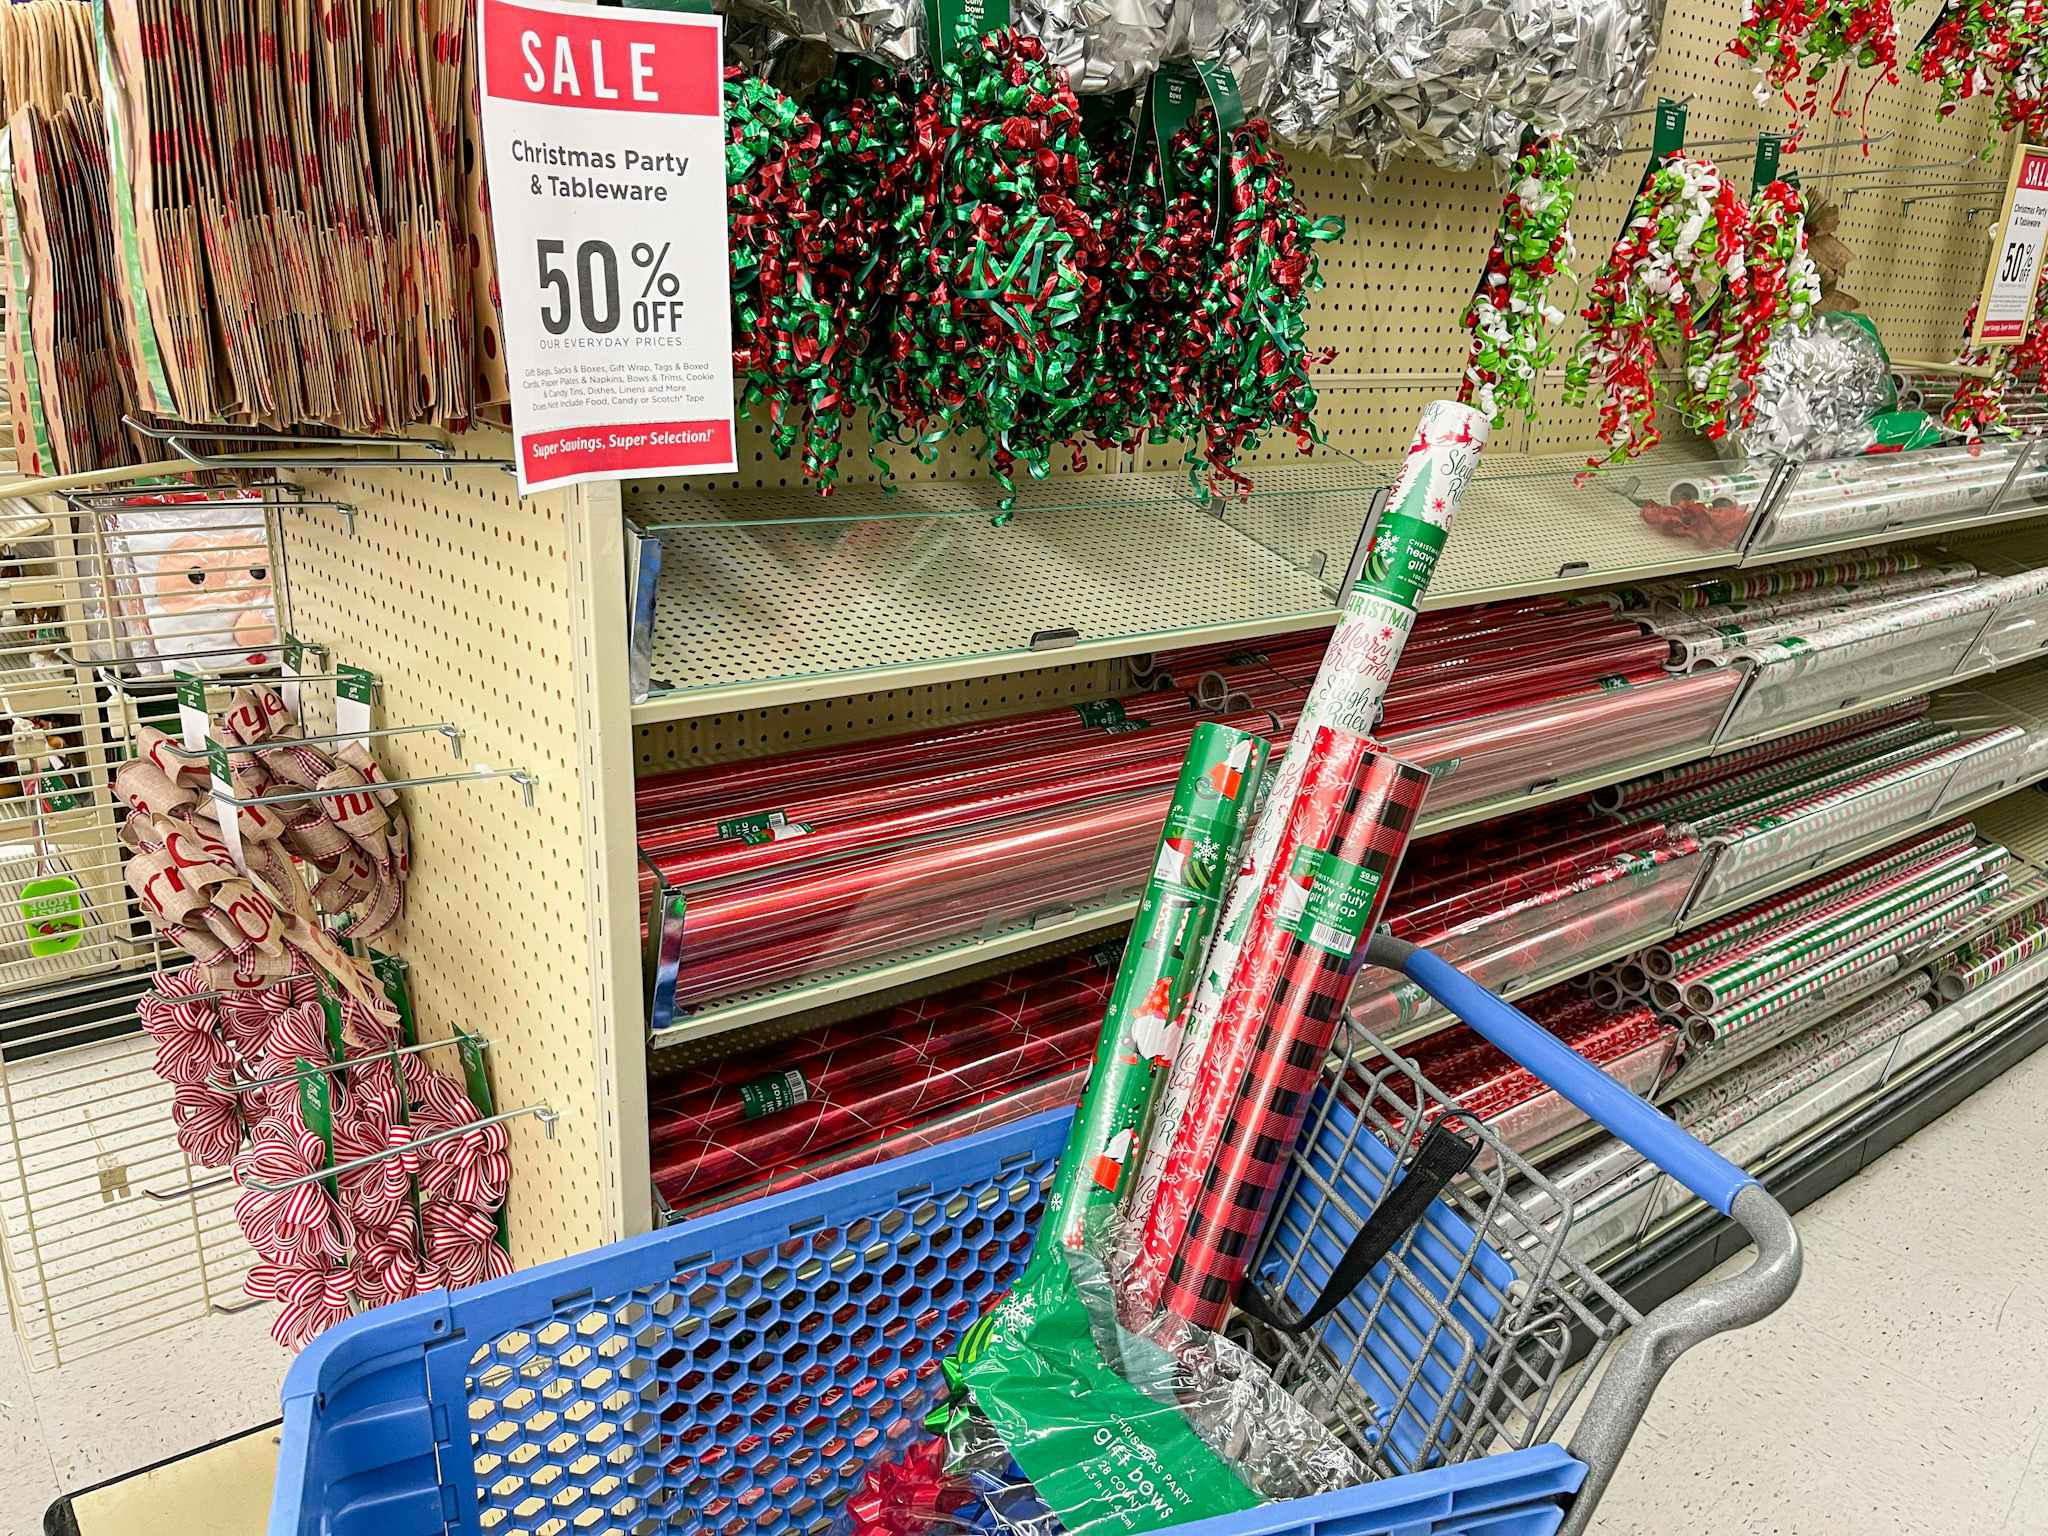 Rolls of gift wrapping paper and other supplies in a Hobby Lobby shopping cart next to a sign advertising 50% off